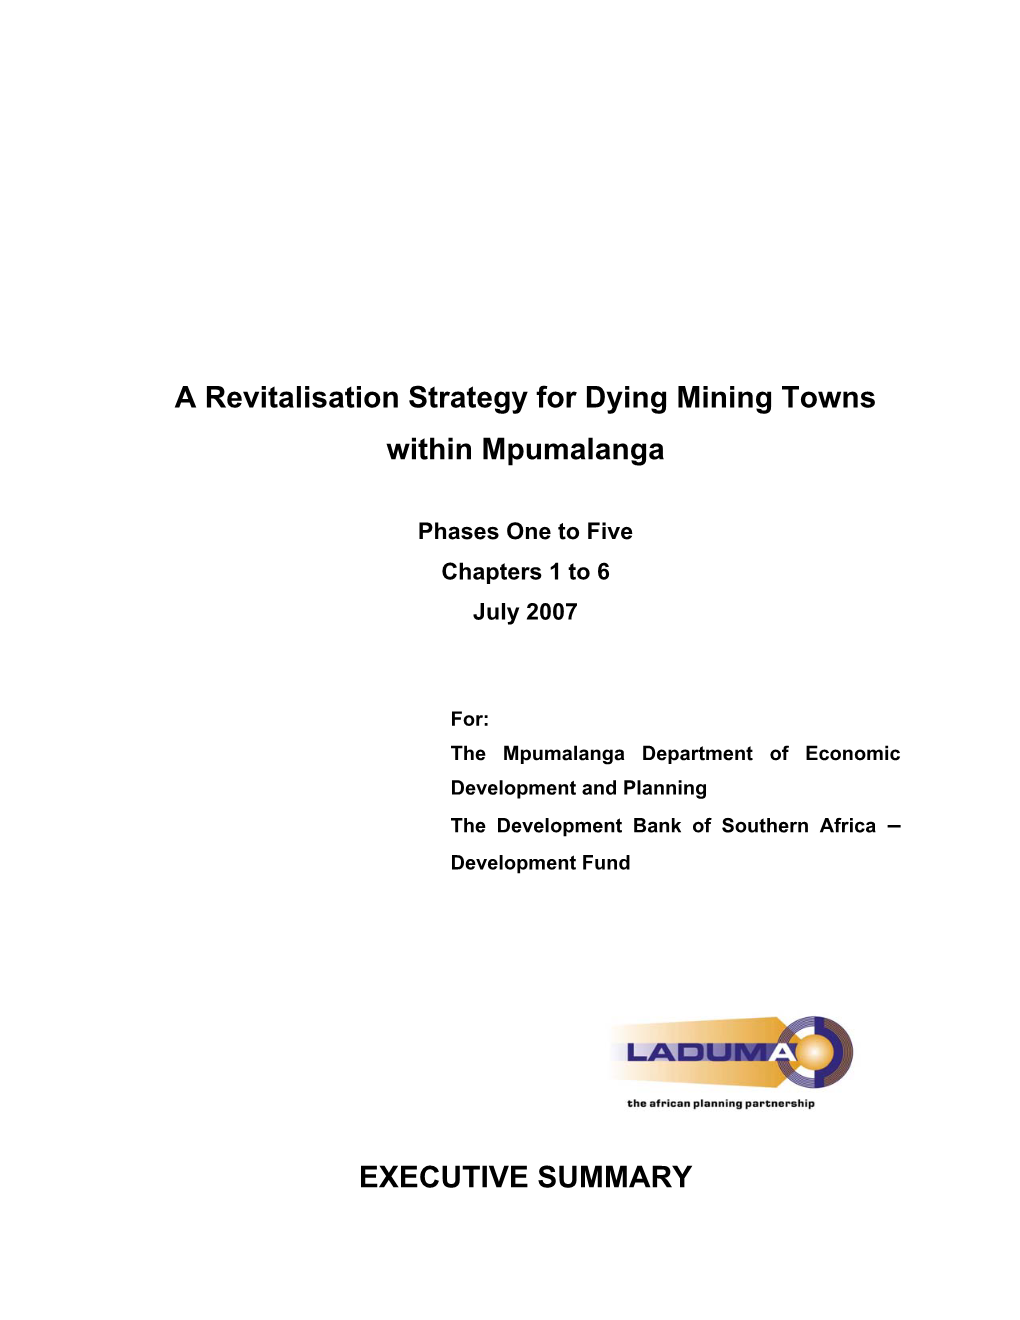 A Revitalisation Strategy for Dying Mining Towns Within Mpumalanga